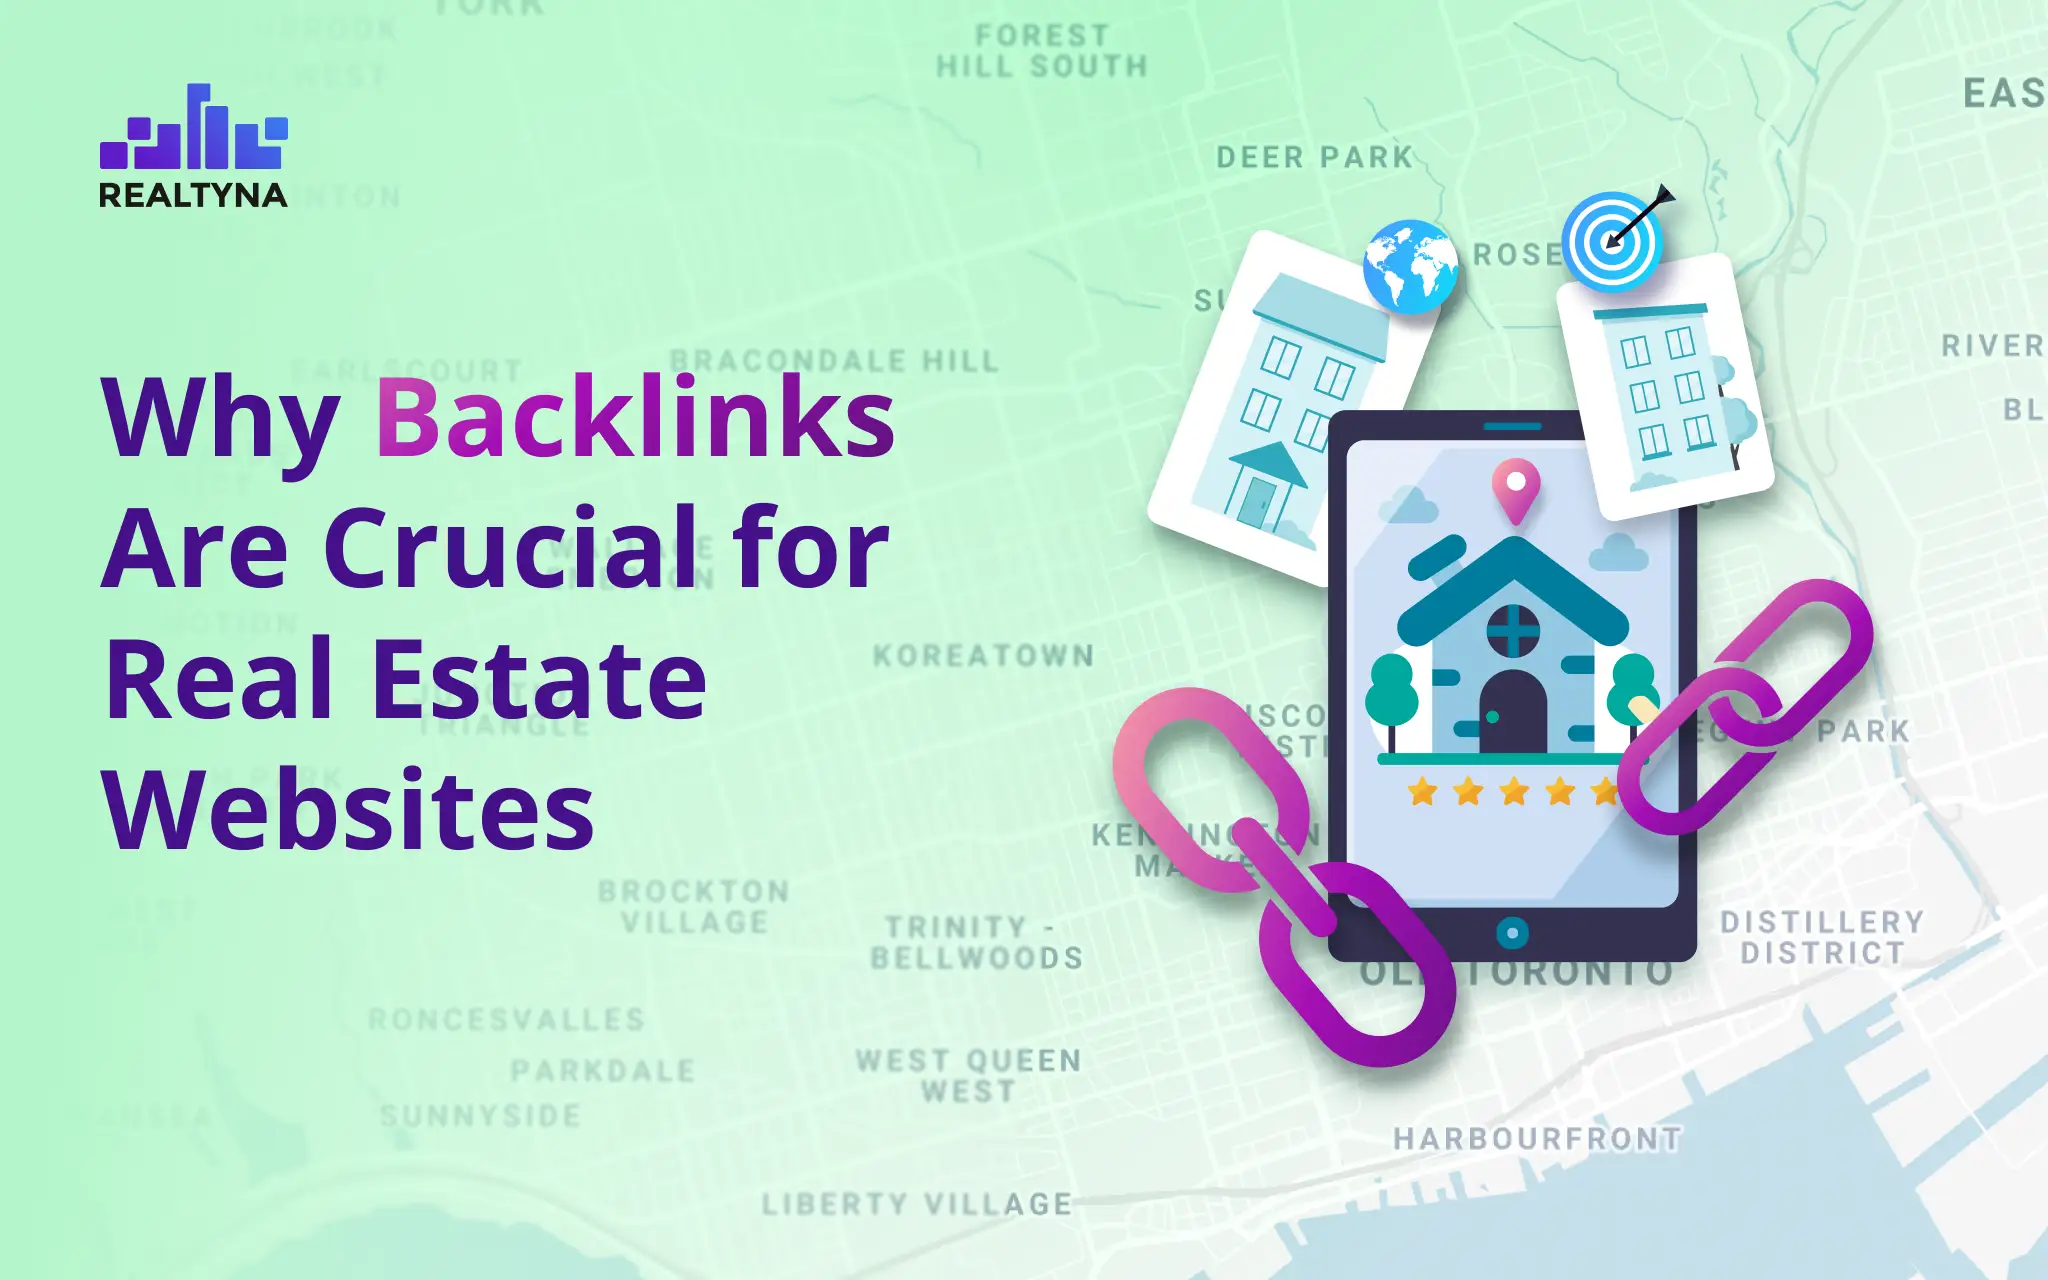 Why Backlinks Are Crucial for Real Estate Websites